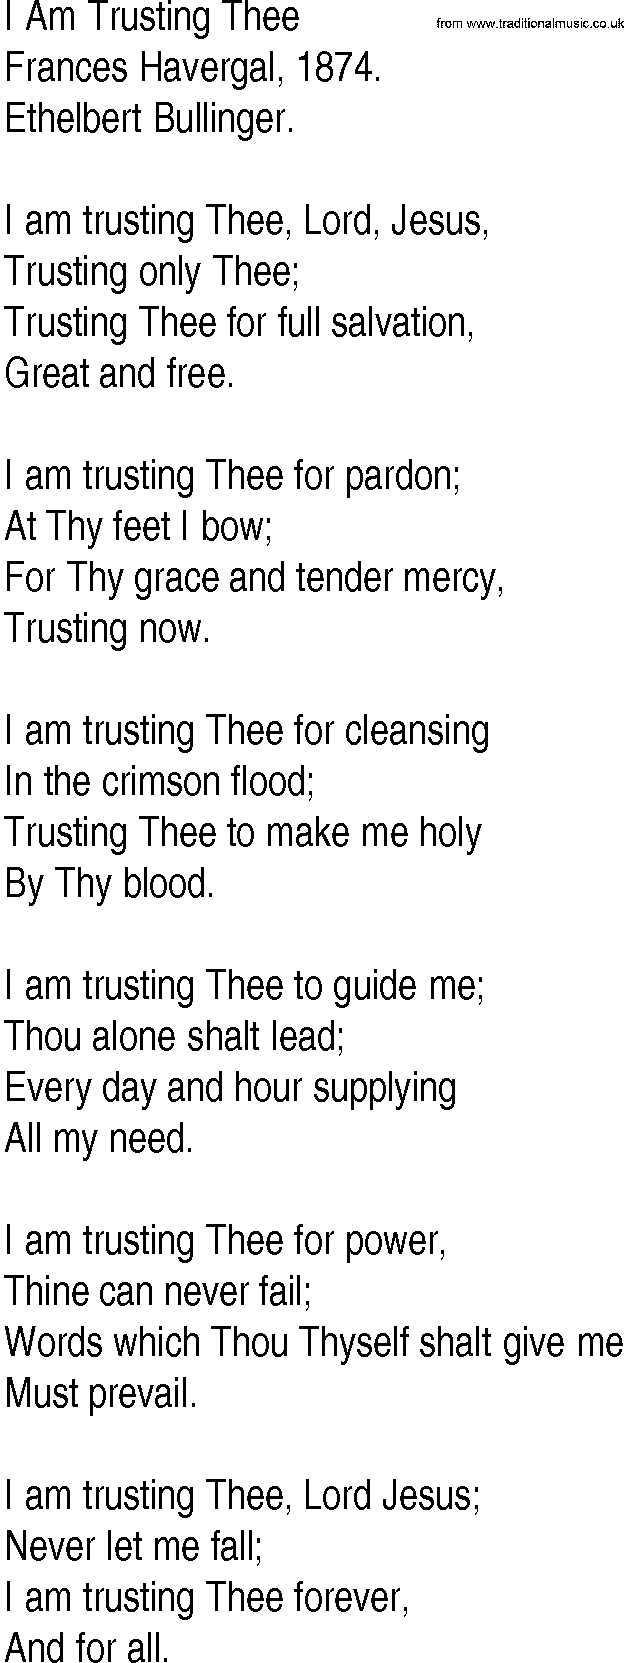 Hymn and Gospel Song: I Am Trusting Thee by Frances Havergal lyrics